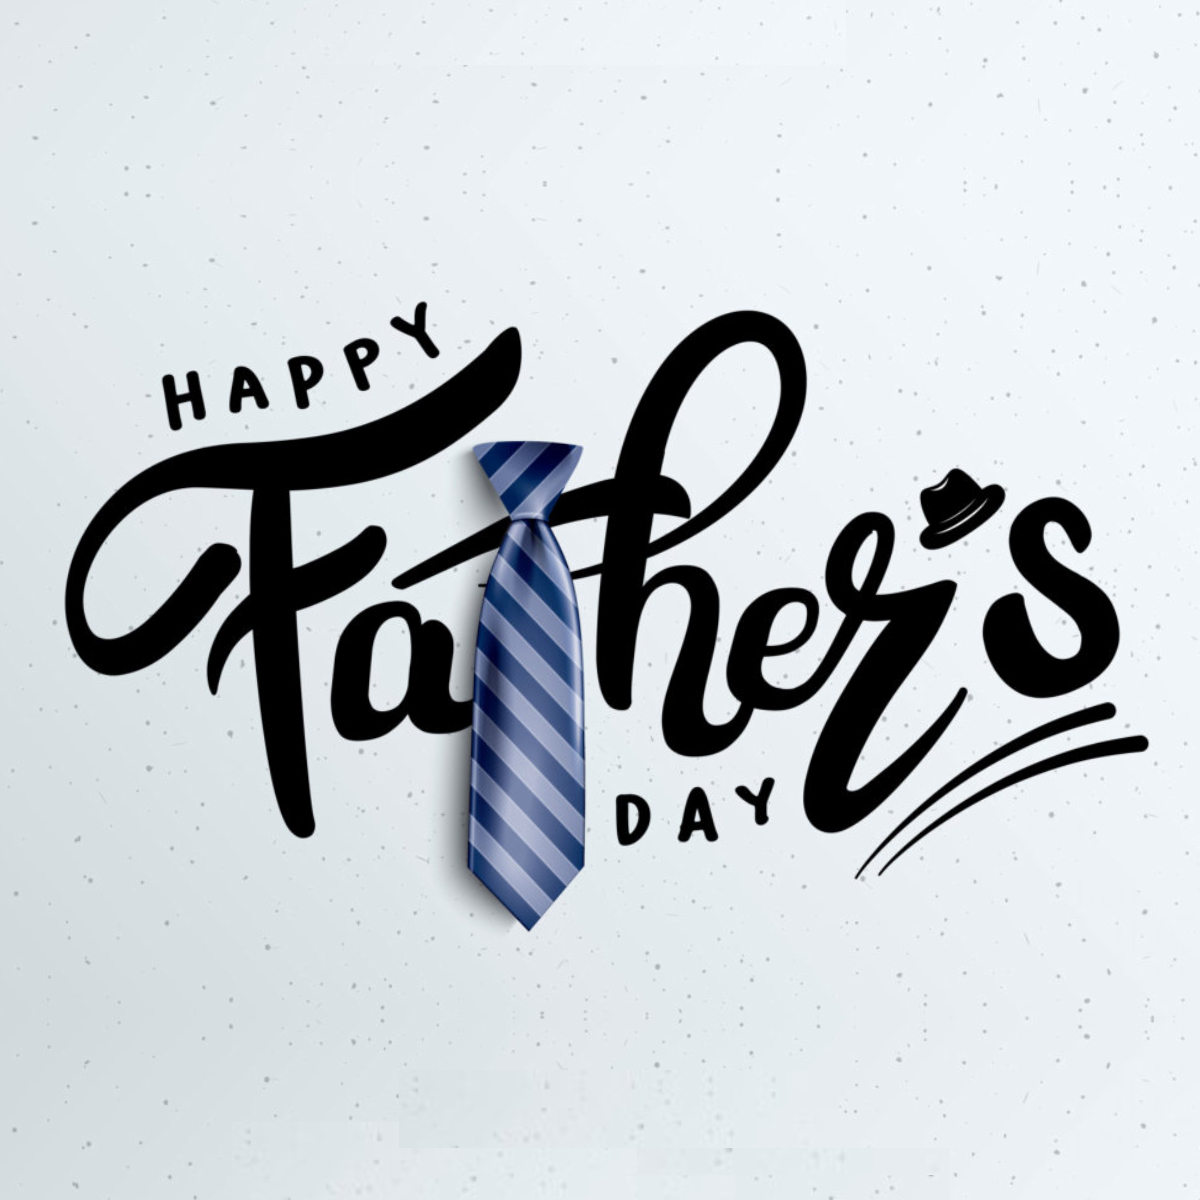 Celebrating All the Dads in Our Lives 

Our dads deserve all the love and appreciation we can offer them. As we celebrate Father’s Day, this is the perfect time to show your dads some love!

Happy Father’s Day!

#FathersDay #EastportME #PharmacyServices